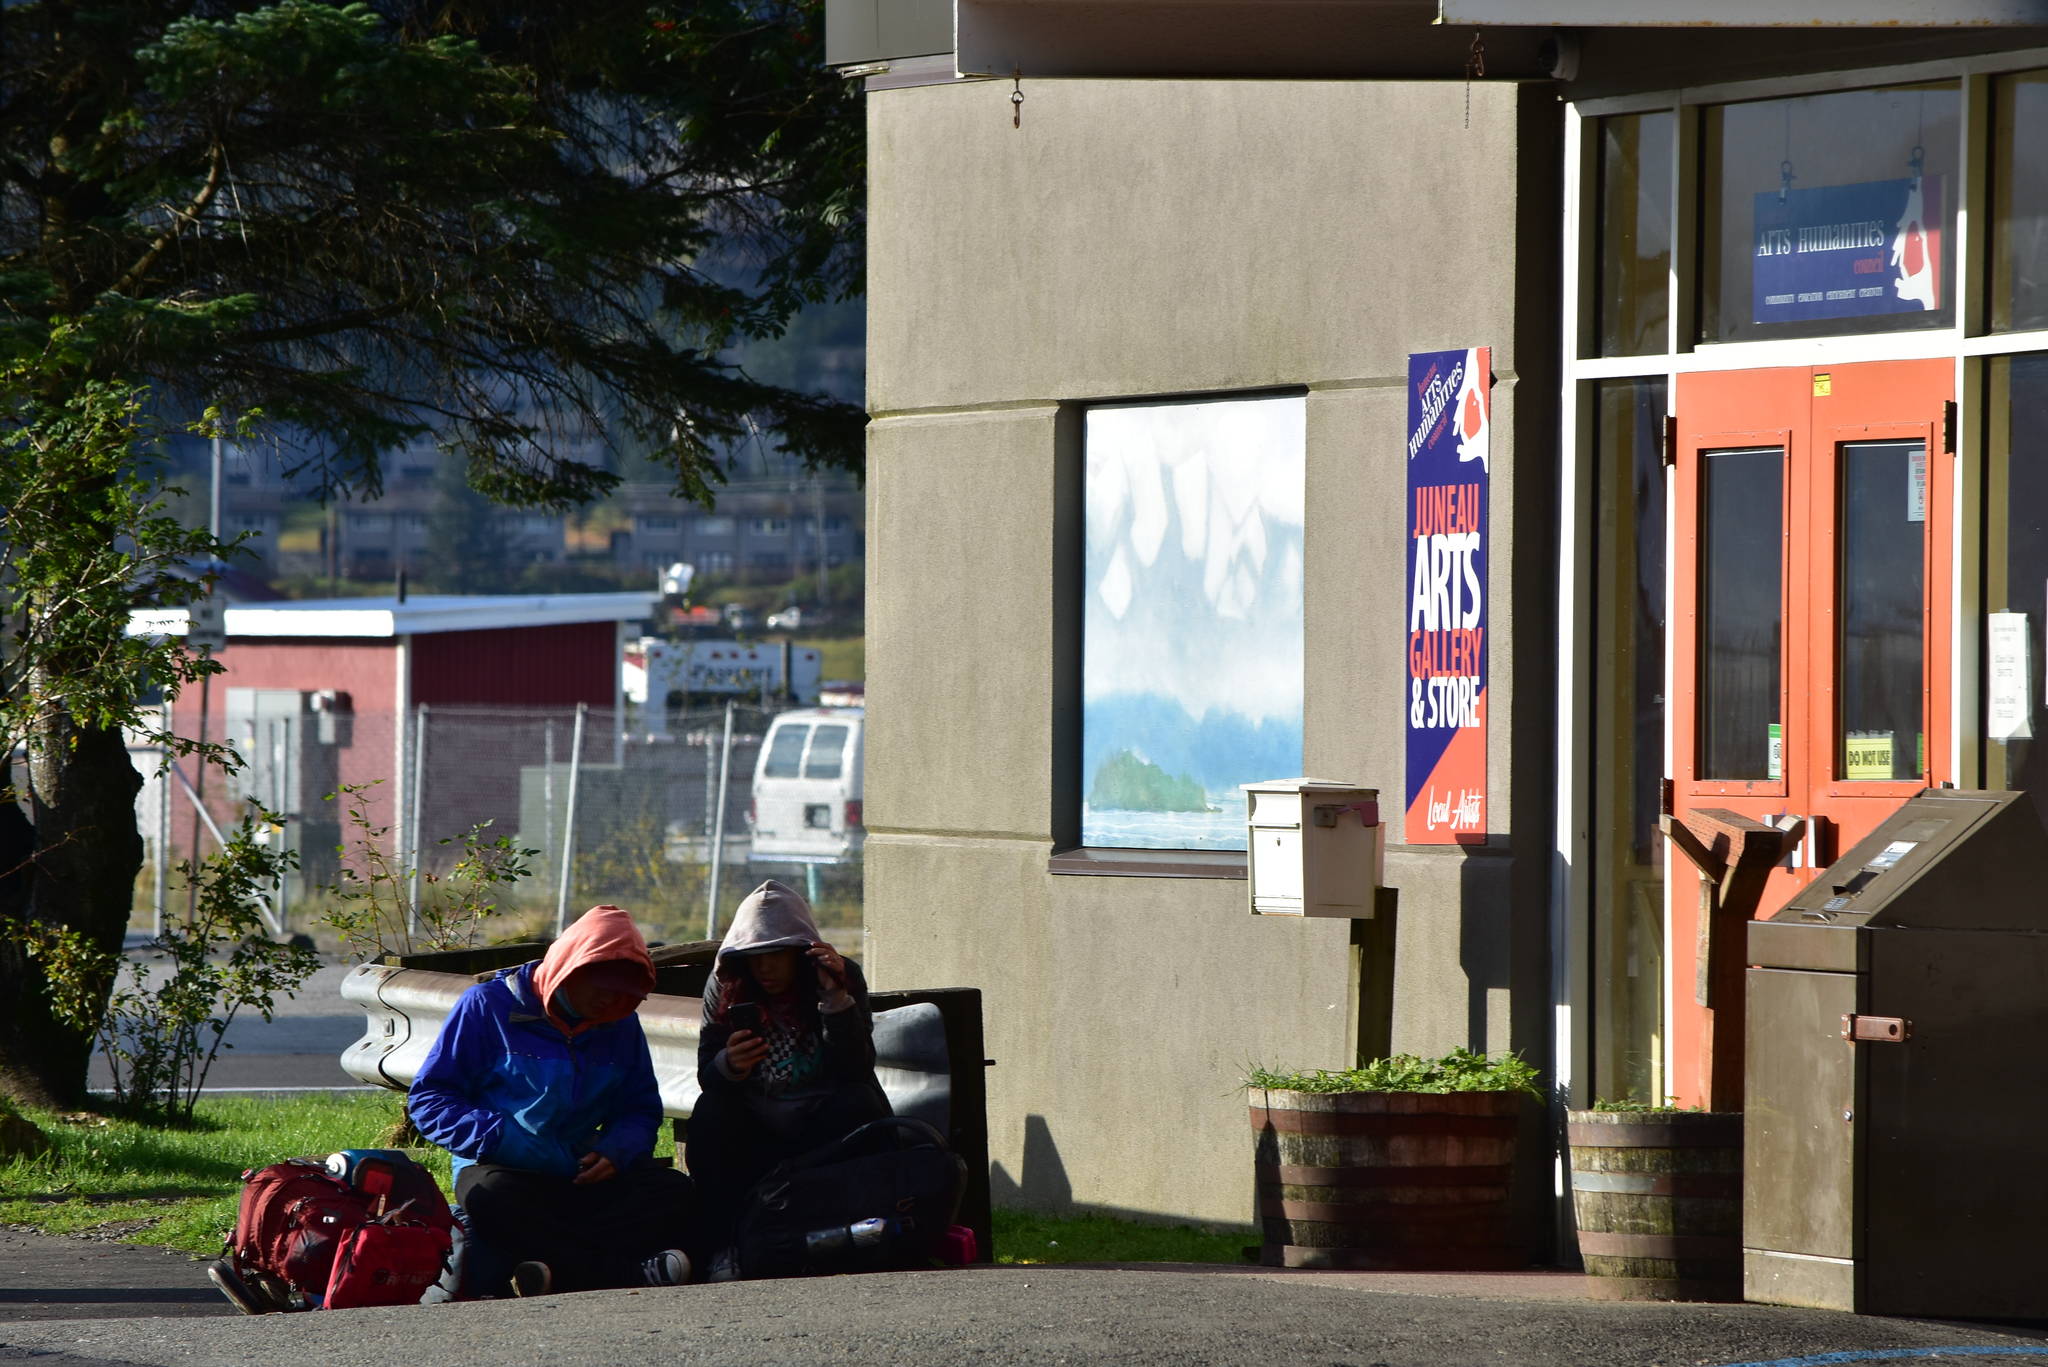 People sit outside the Juneau Arts & Culture Center on Tuesday, Sept. 15. The JACC is poised to serve as an emergency warming shelter through the first quarter of next year. (Peter Segall / Juneau Empire)